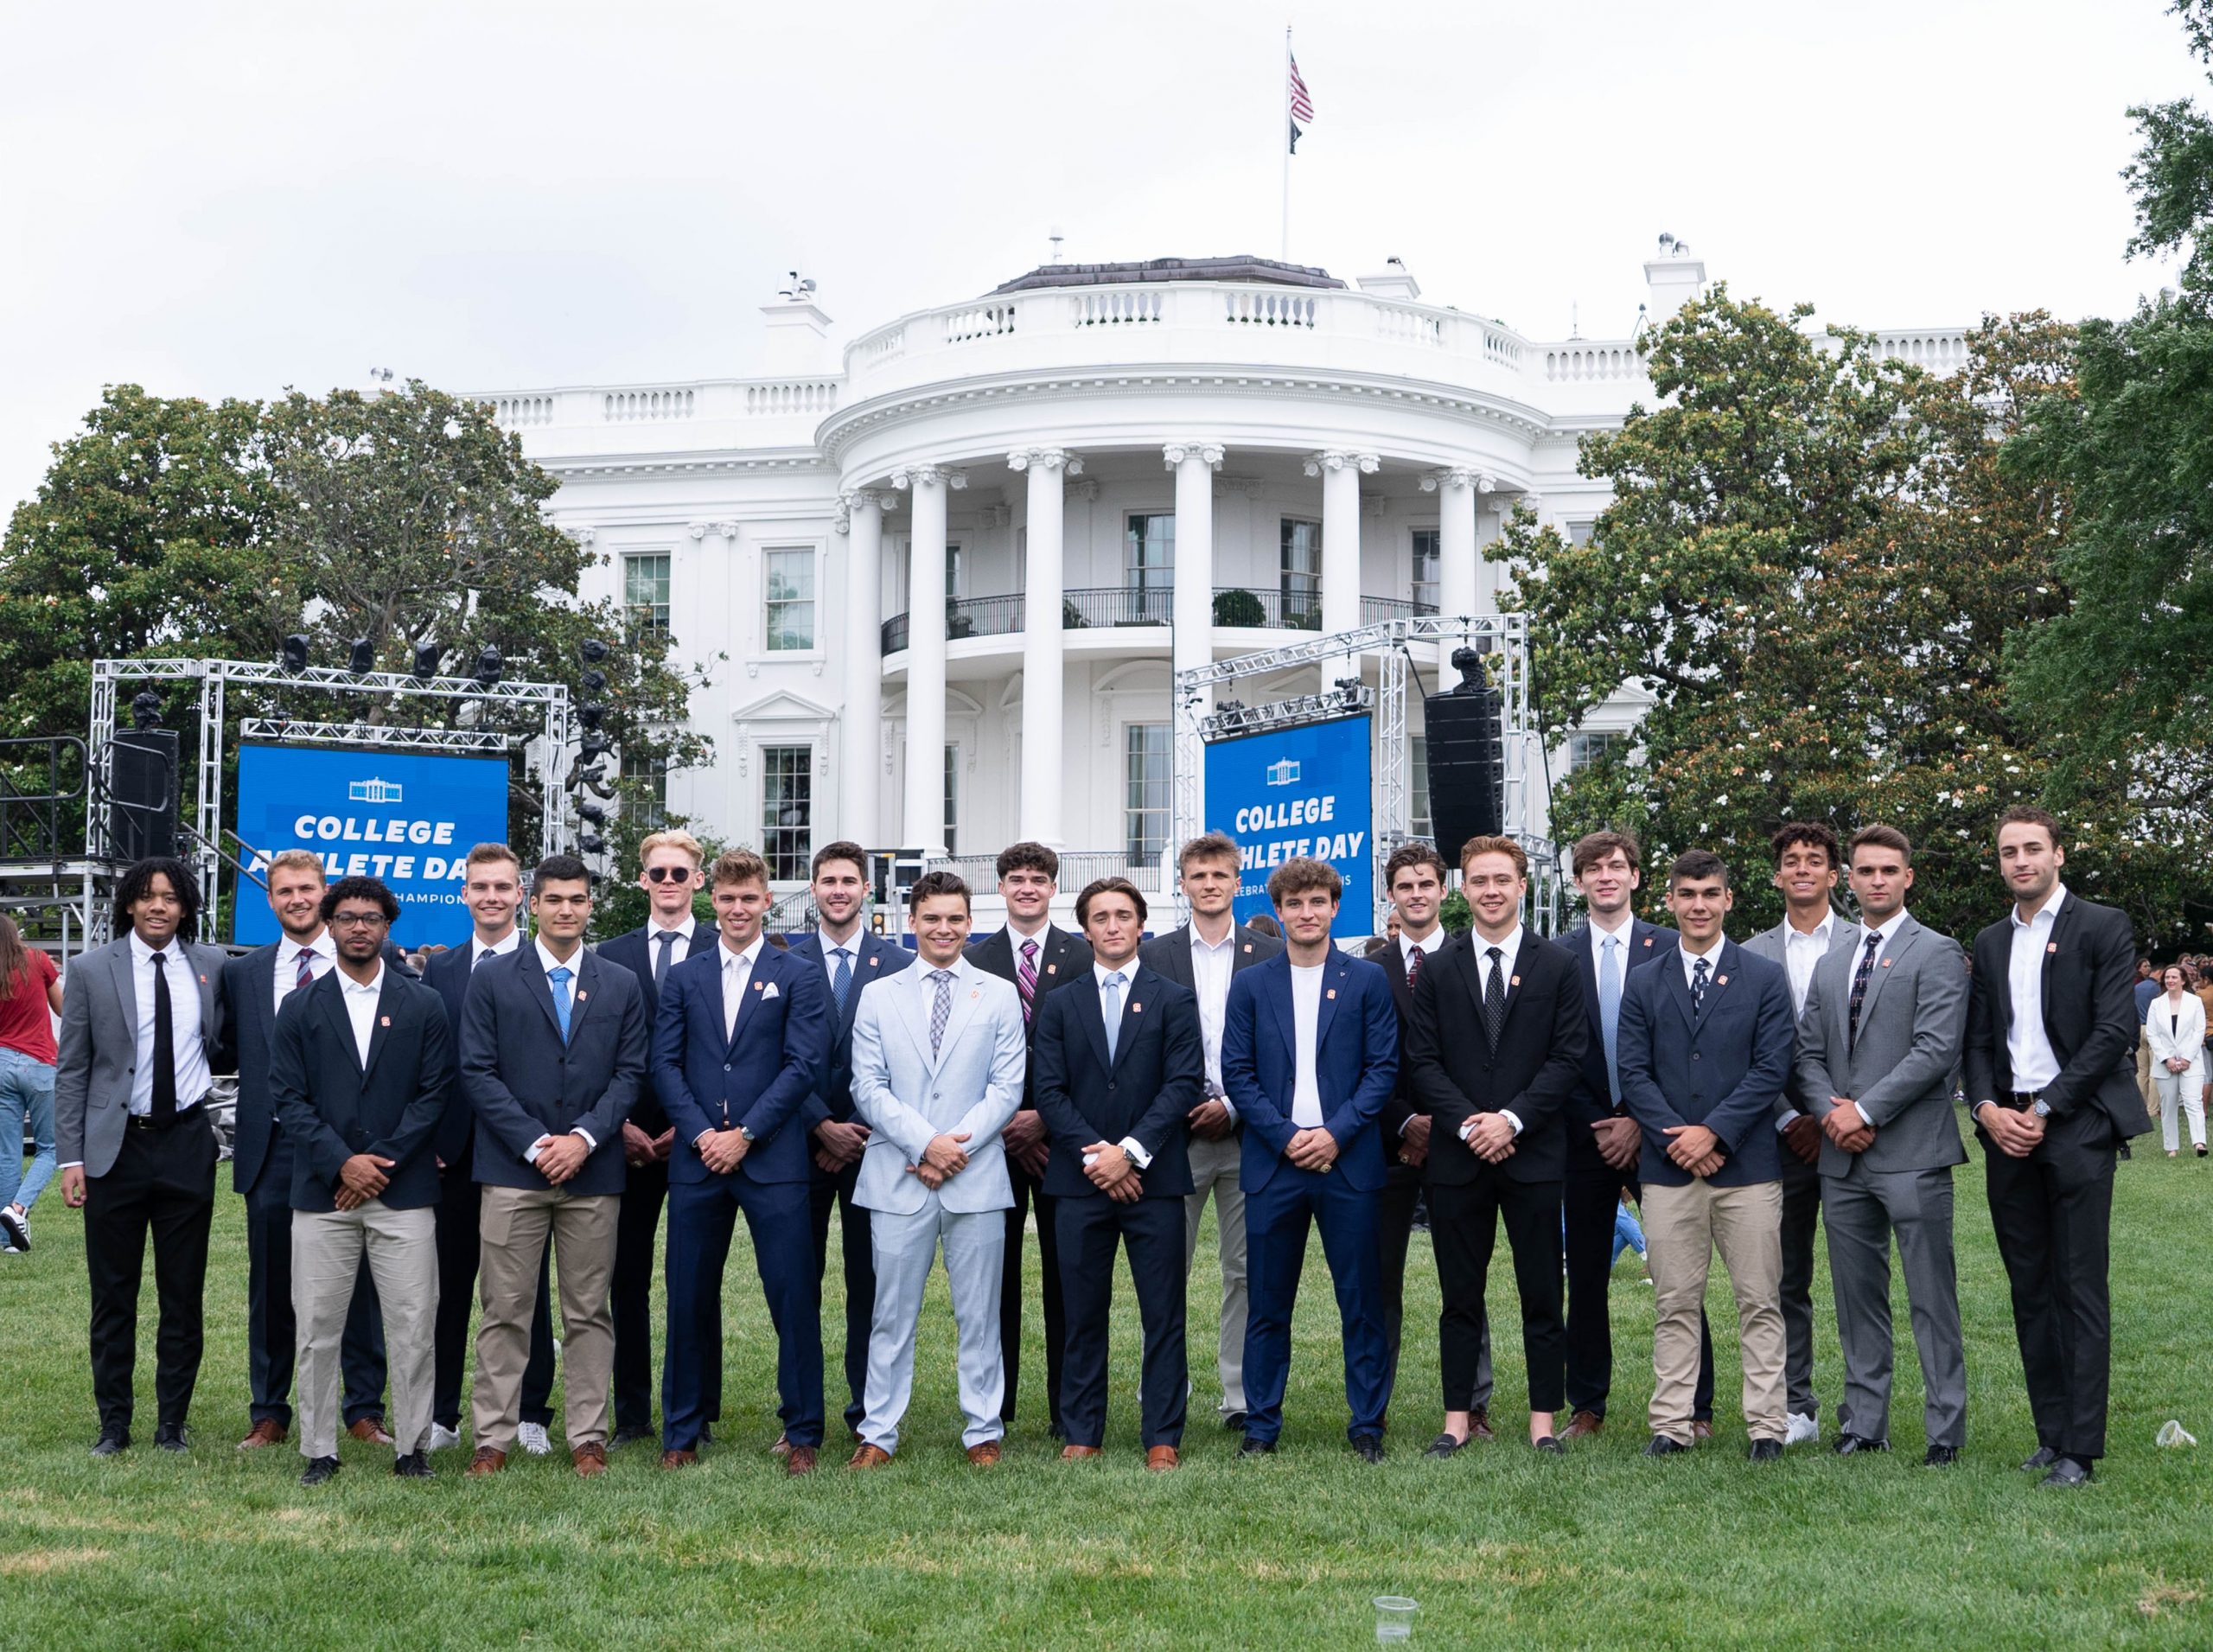 Men's soccer team all dressed in suits standing on the lawn in front of the White House. 